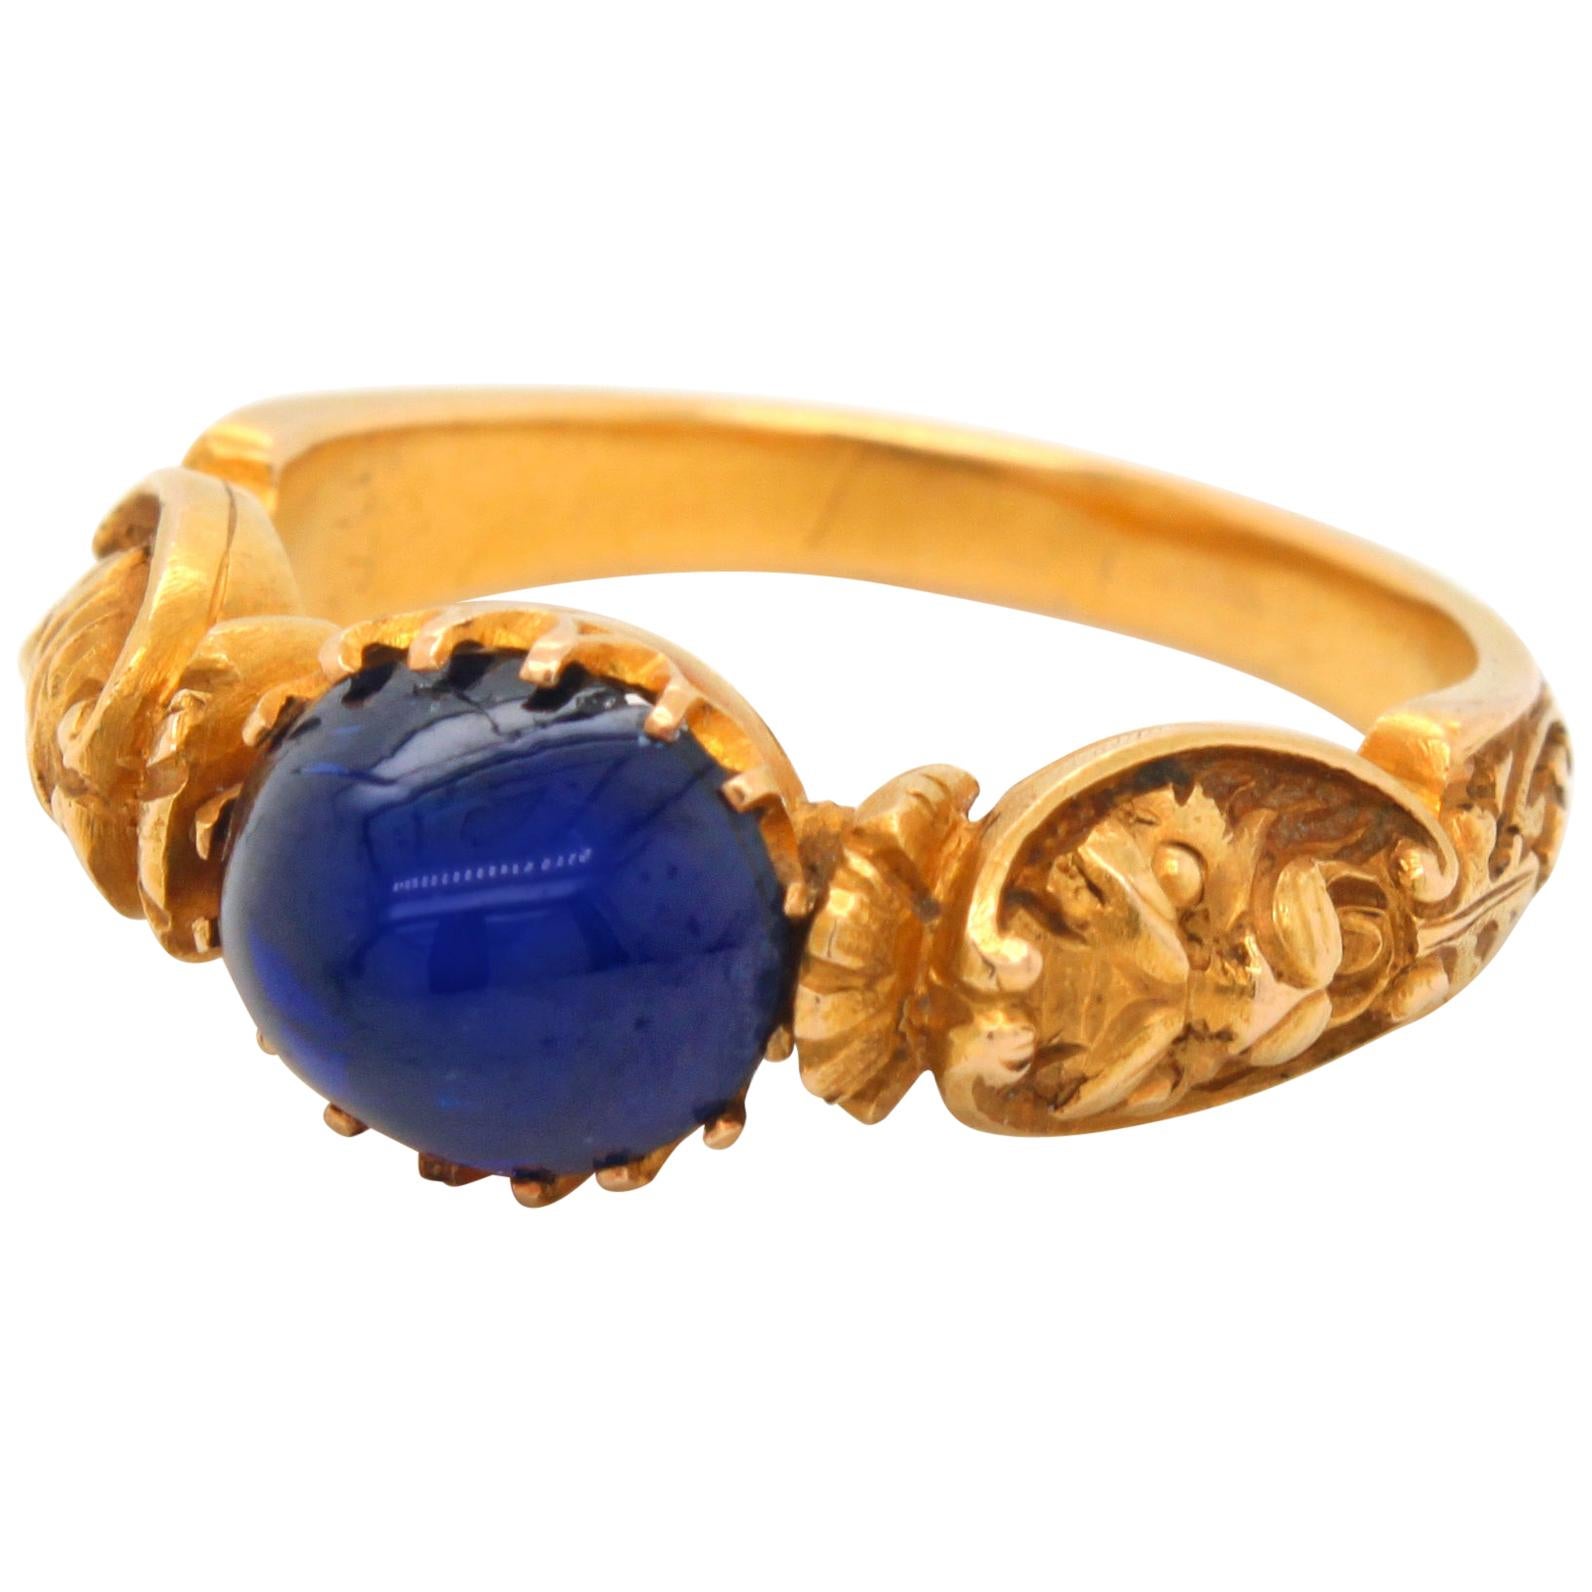 Renaissance Revival Sapphire and Gold Ring, circa 1840s